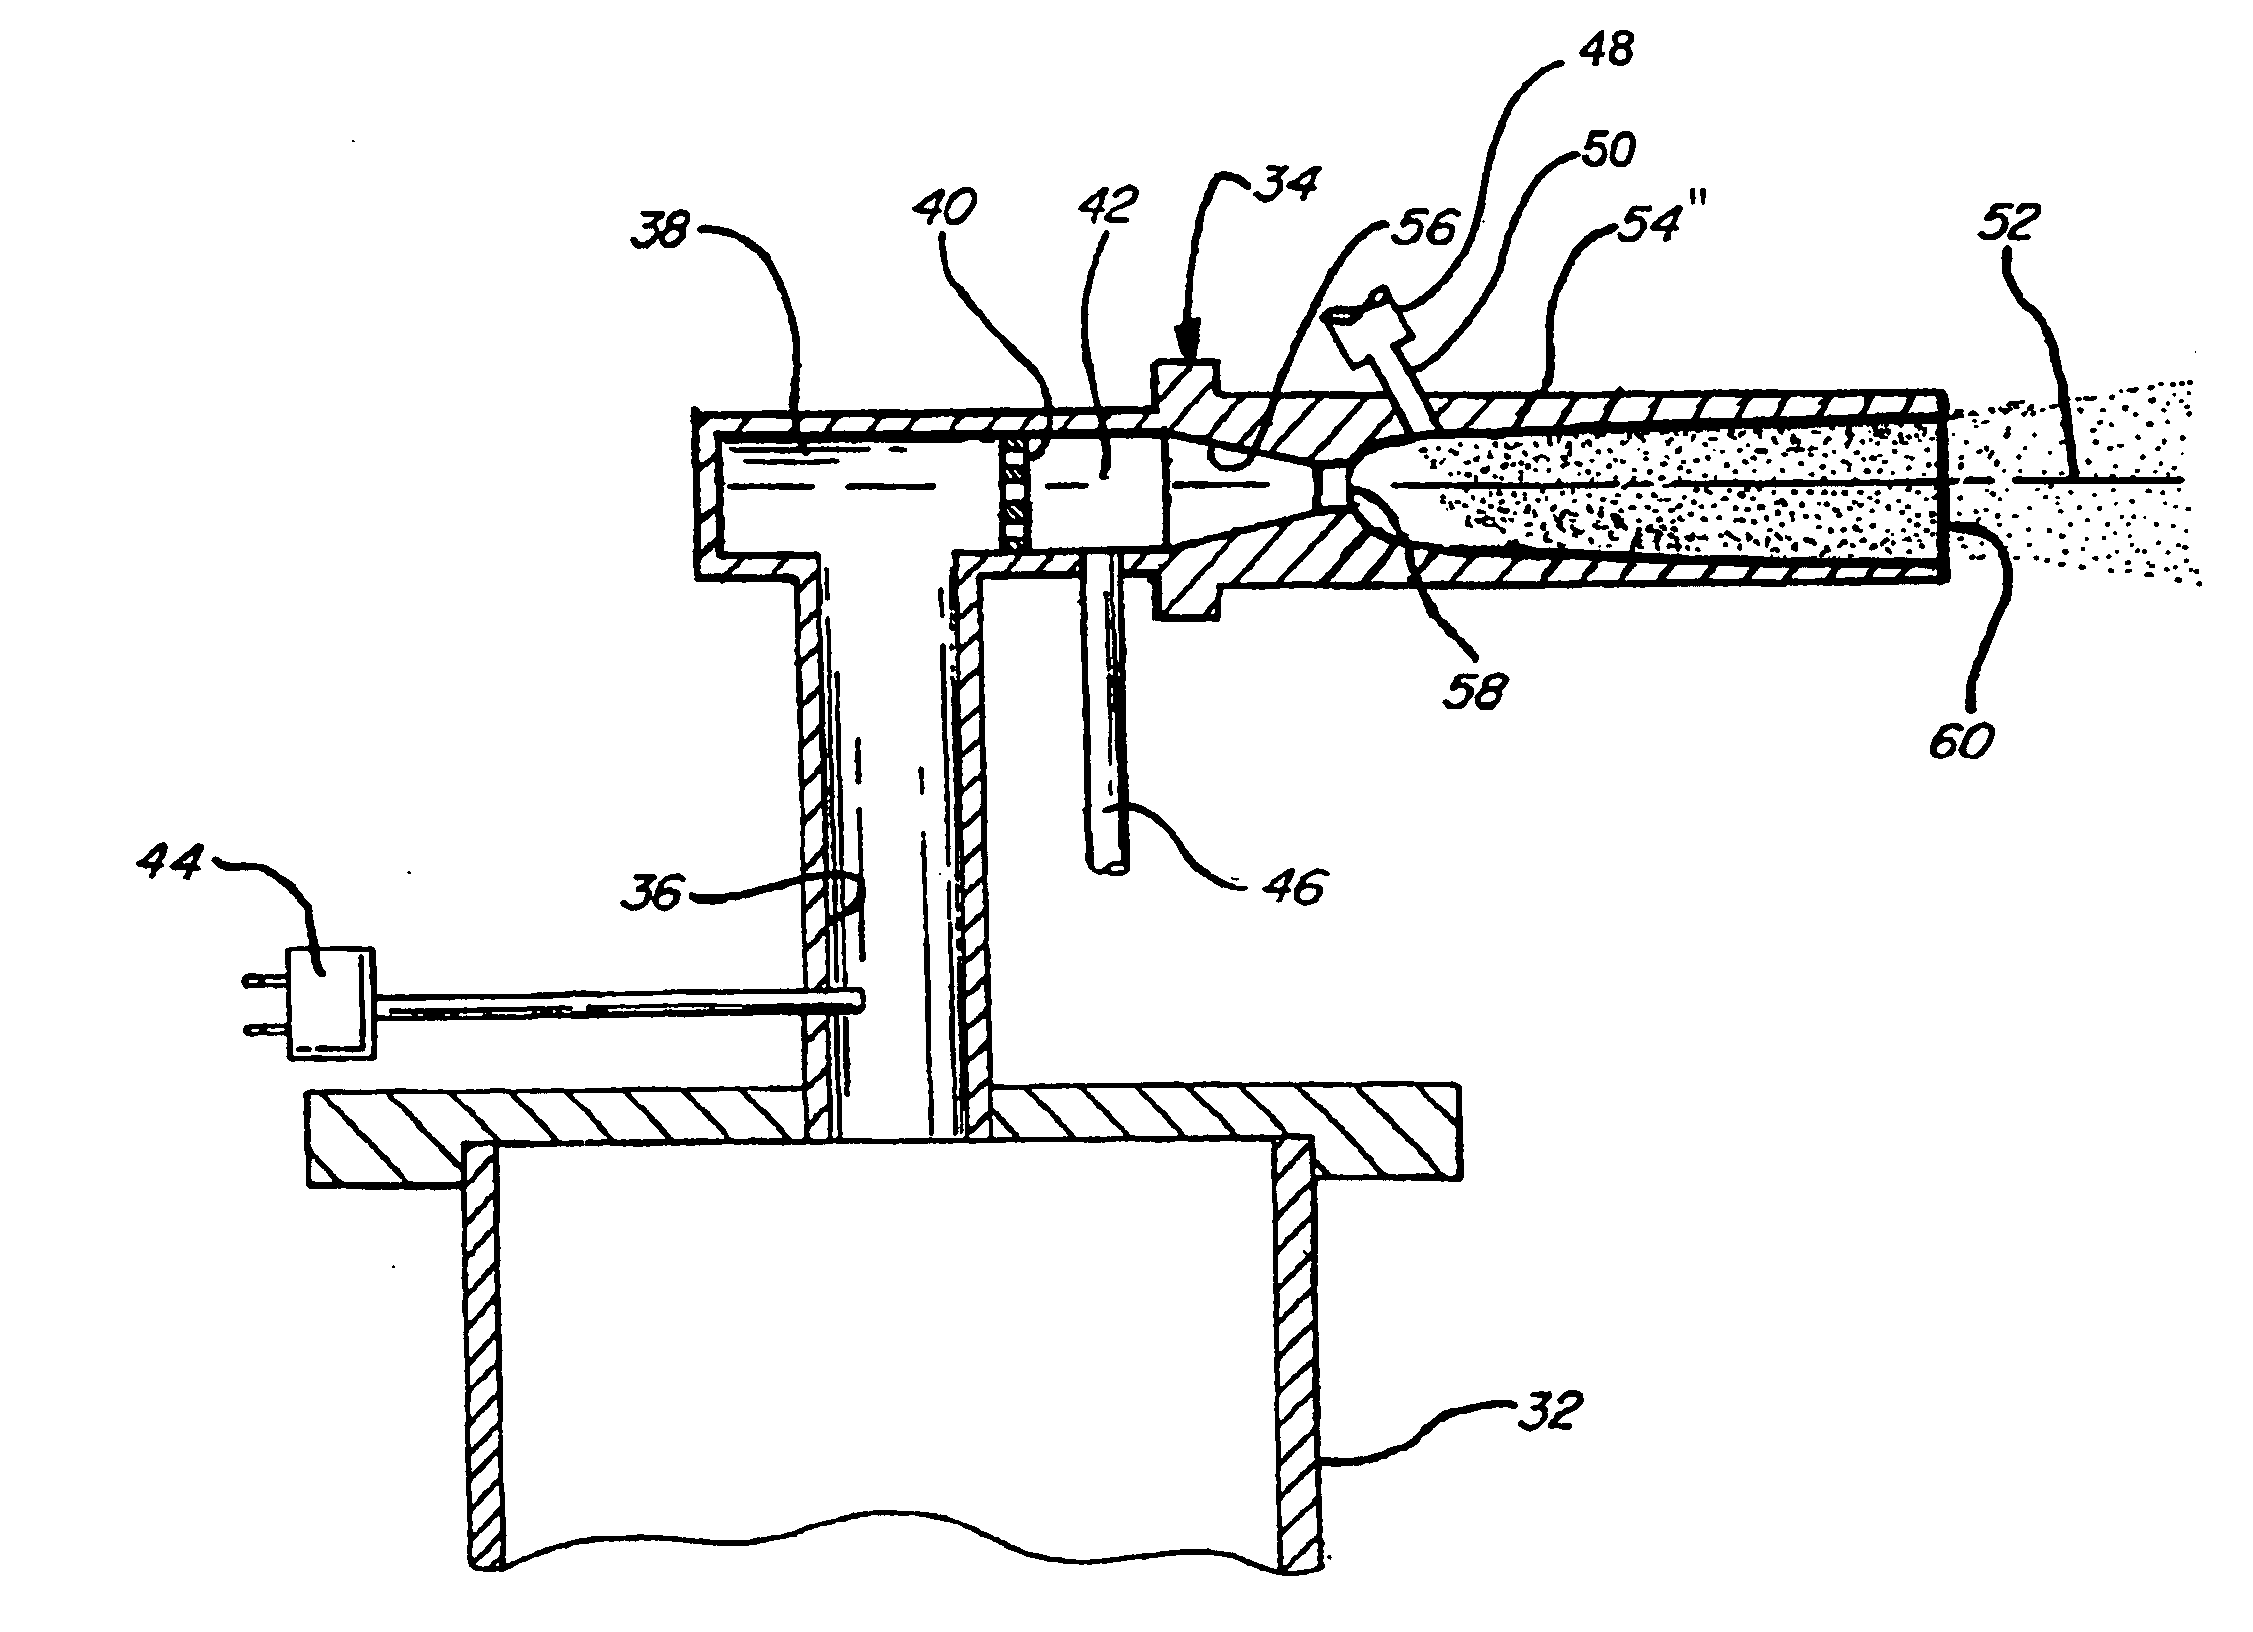 Modified high efficiency kinetic spray nozzle